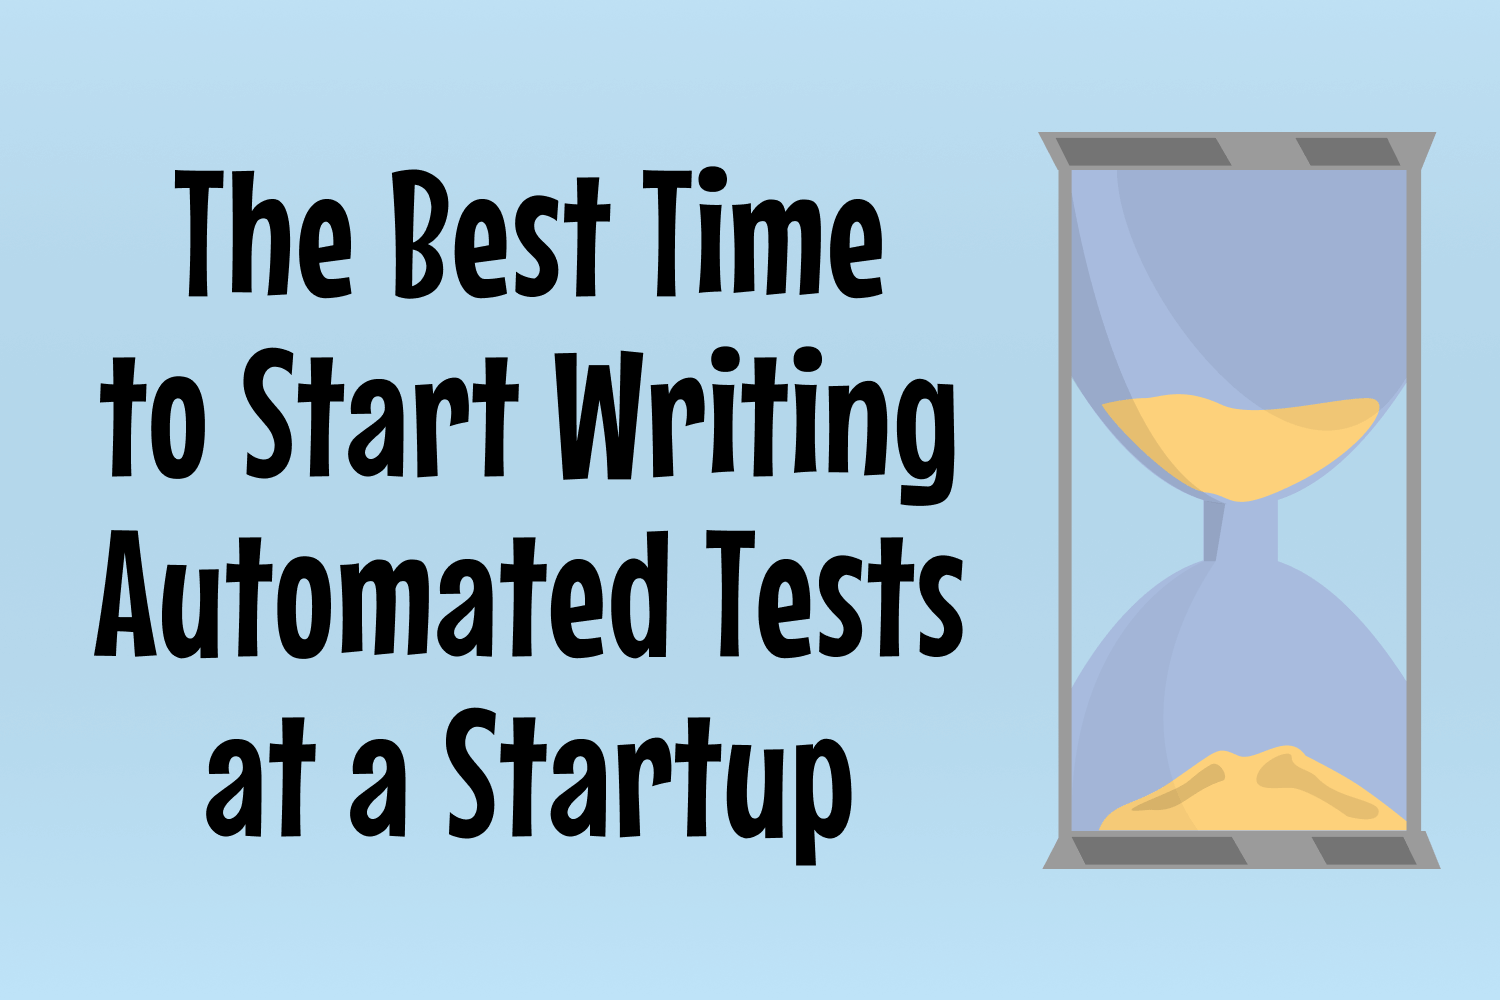 The Best Time to Start Writing Automated Tests at a Startup